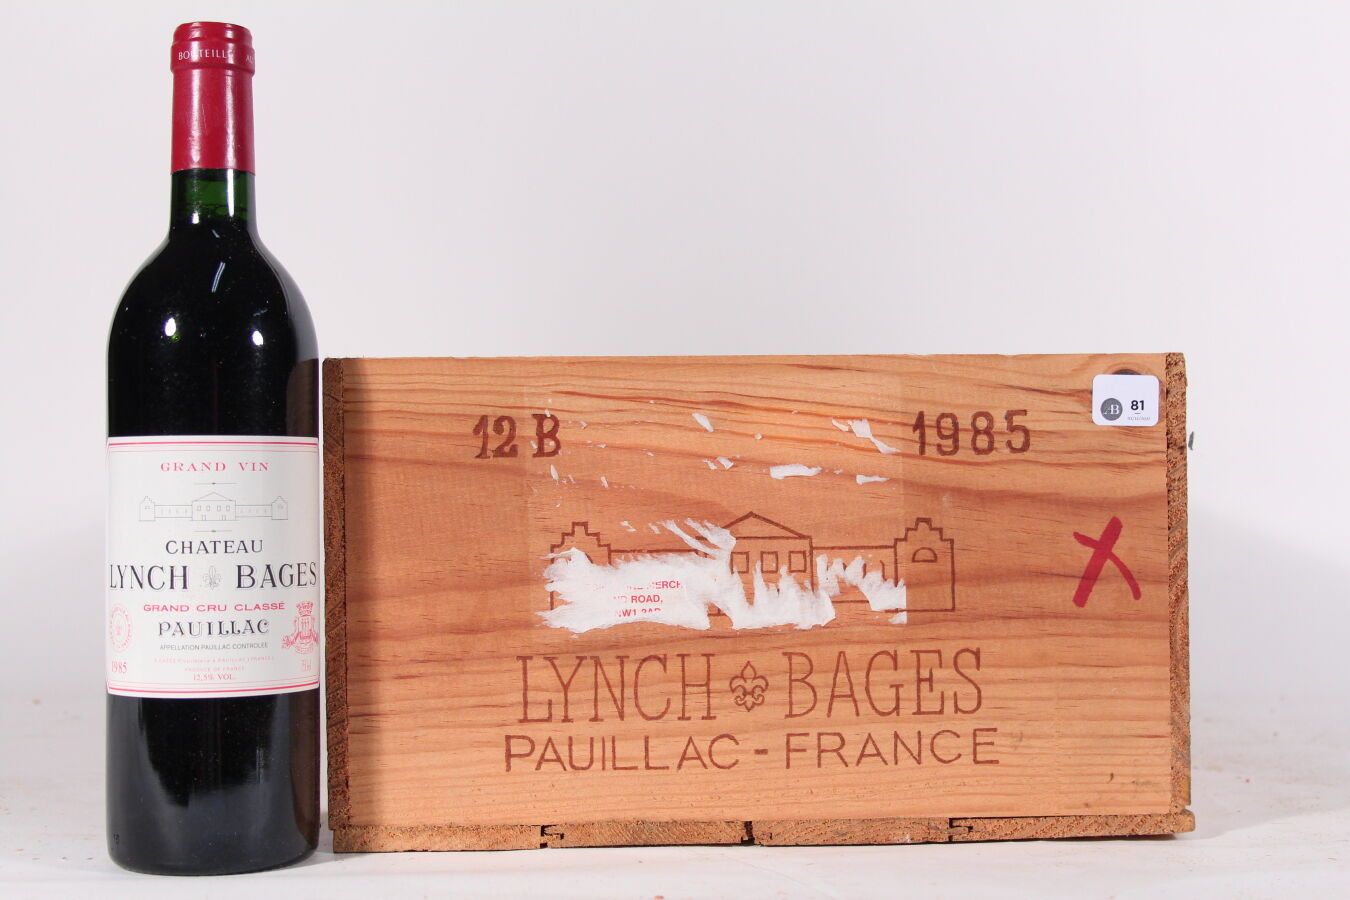 Null 1985 - Château Lynch-Bages
Pauillac Rouge - 12 blles CBO